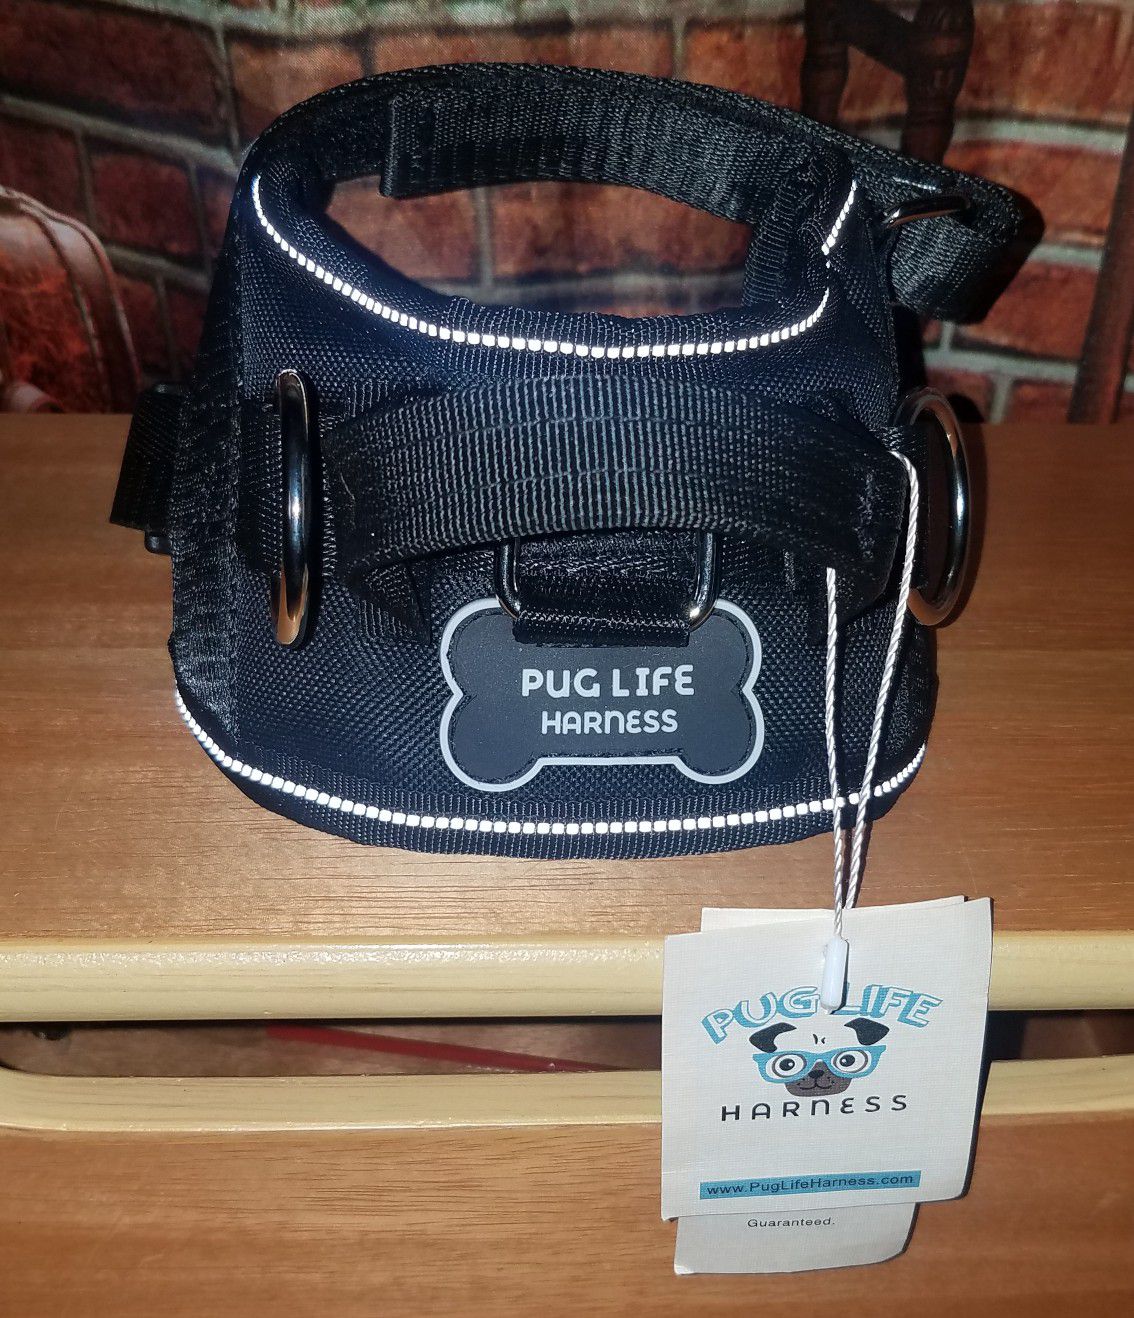 PUG LIFE NEW All-In-One No Pull Dog Harness Black Canine Collar S 5-10 lbs NWT